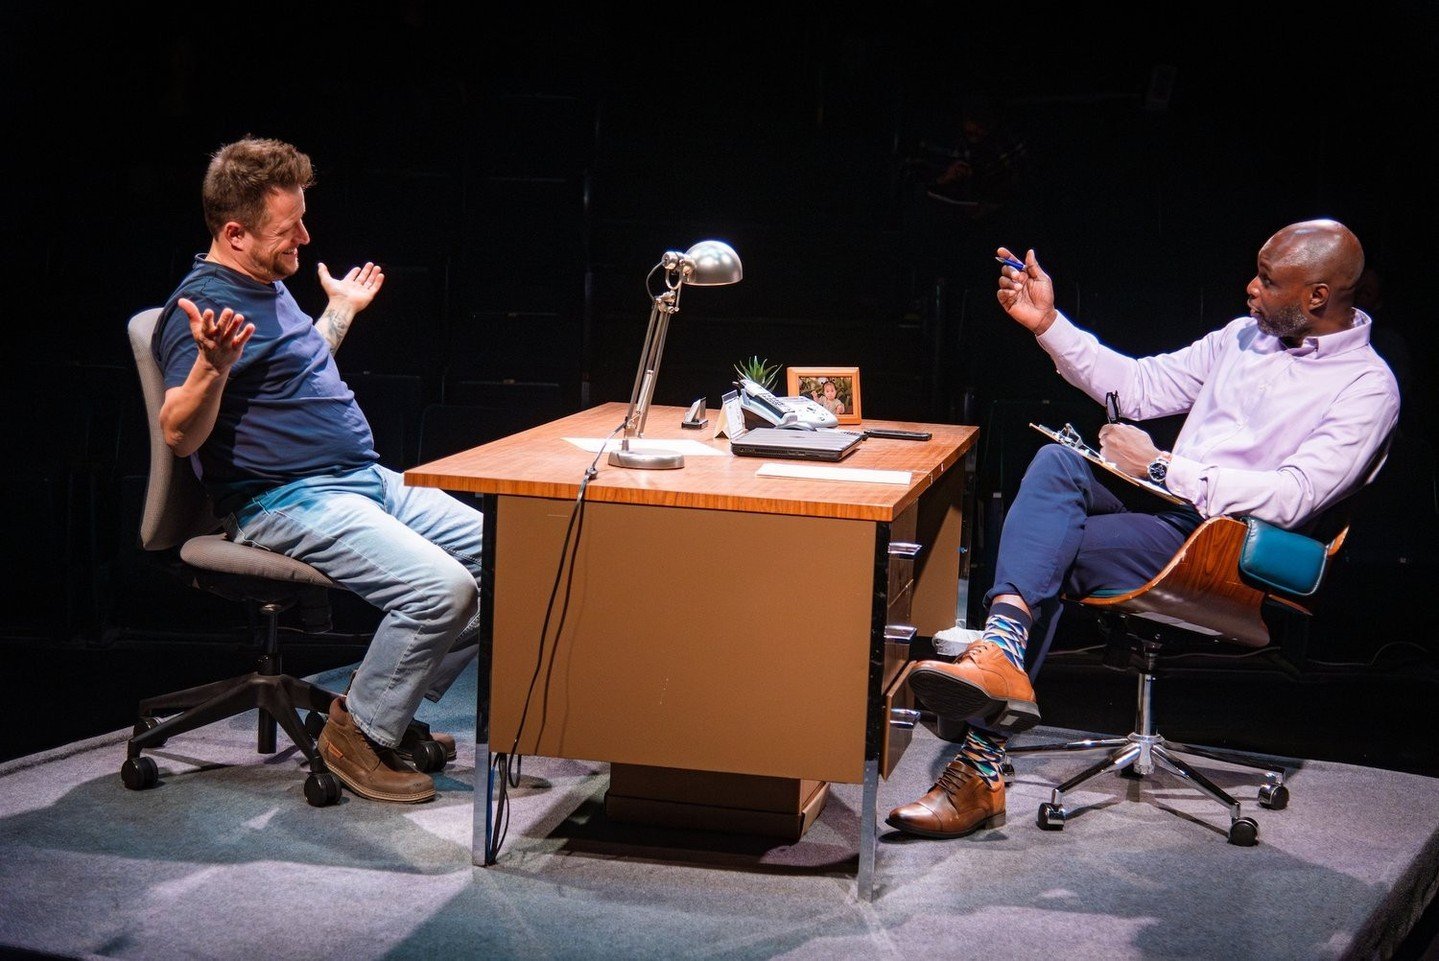 Theatre review: A Case for the Existence of God comes alive with witty and honest back-and-forths.⁠
⁠
Rather than engaging in overt discussions a higher entity, two fathers find nuanced hope in heartbreaking situations, in @PacificTheatre production.